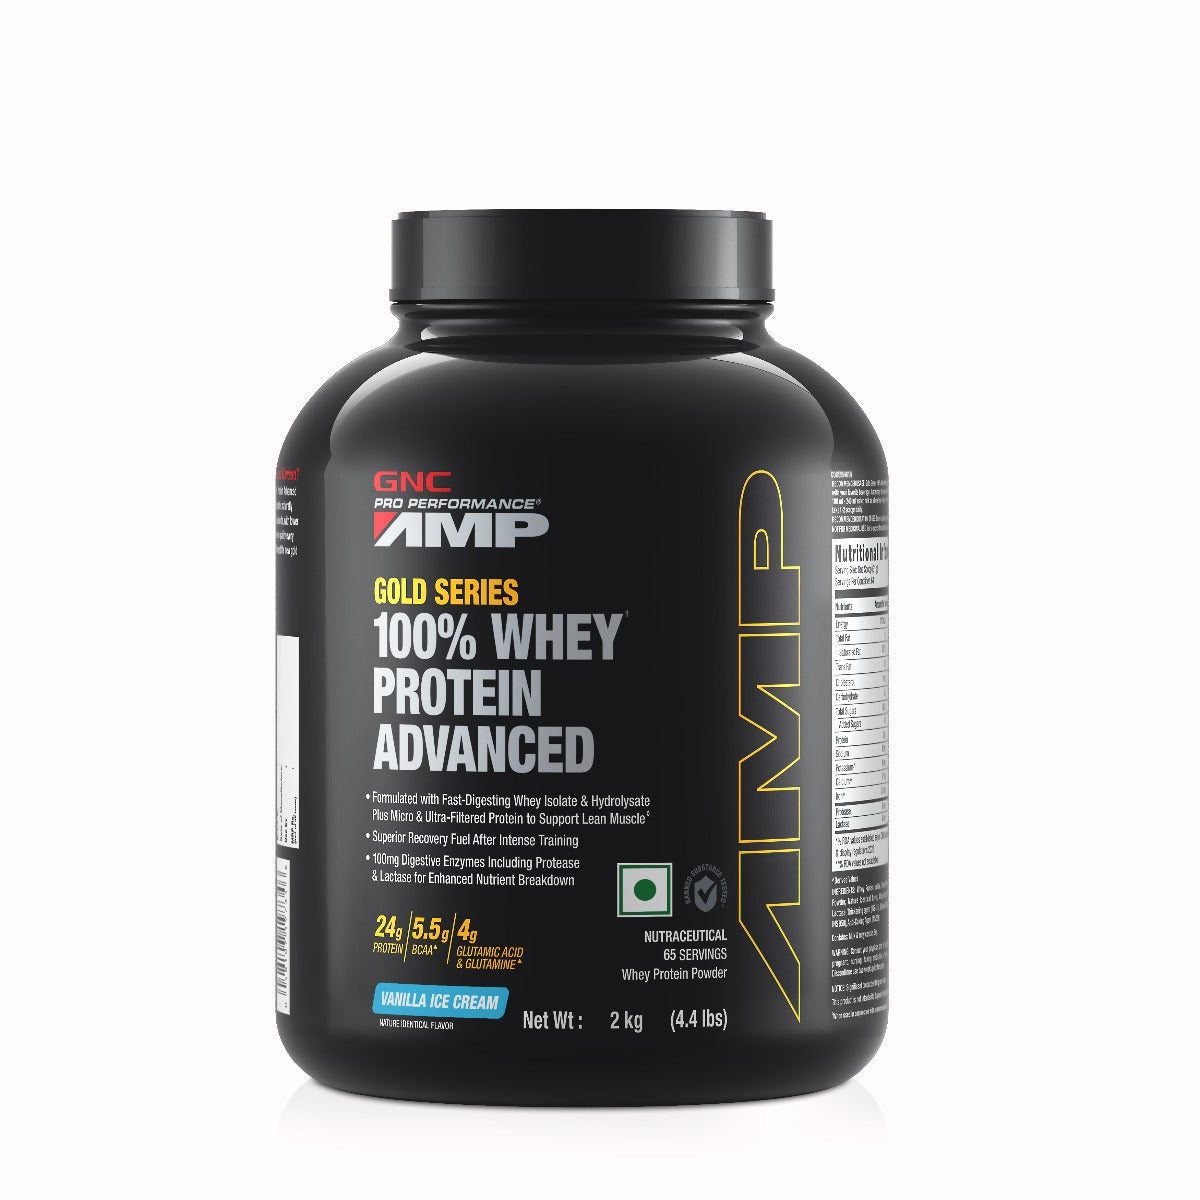 GNC AMP Gold Series 100% Whey Protein Advanced 2KG - 